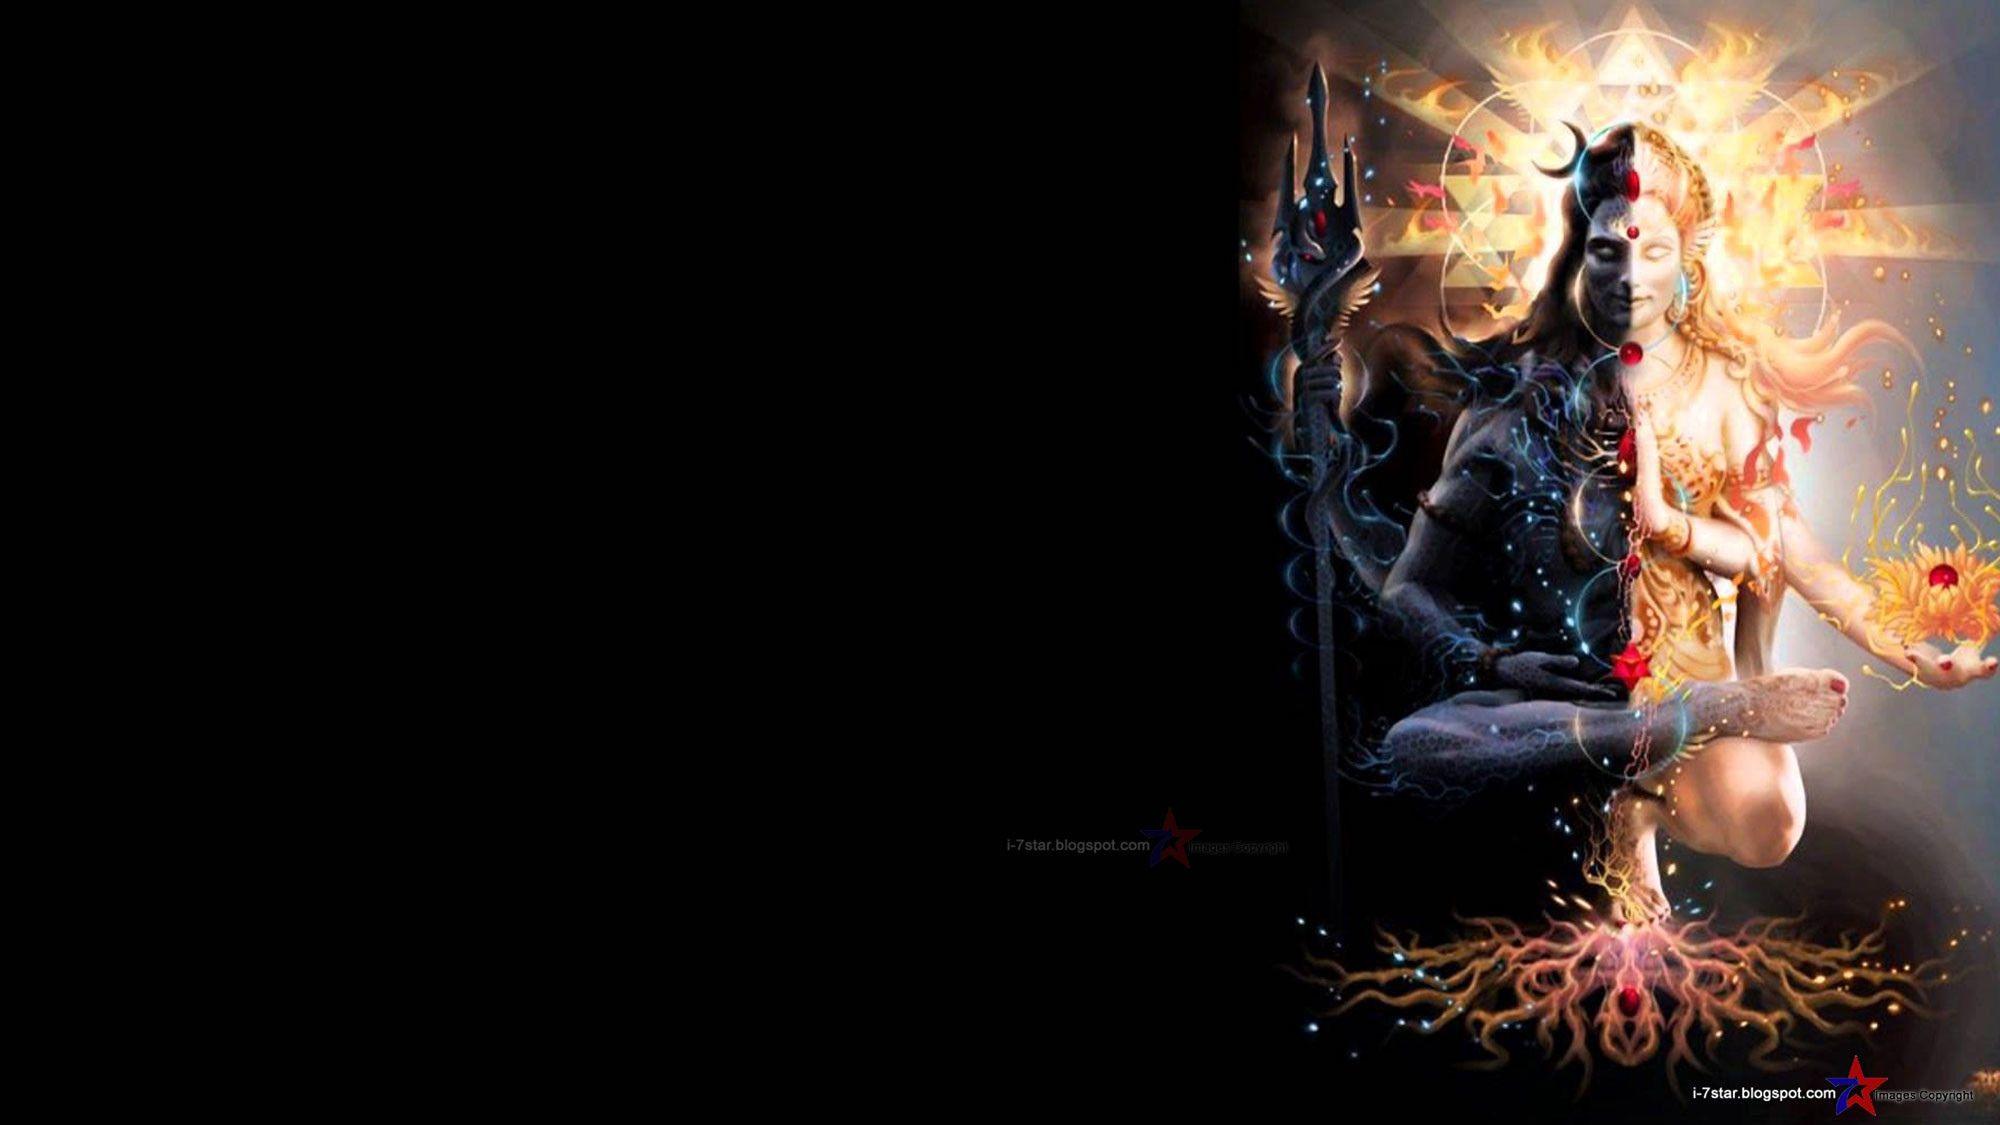 Lord Shiva Black Wall Decal,Wall Sticker and Wallpaper Size(73*59)cm :  Amazon.in: Home Improvement